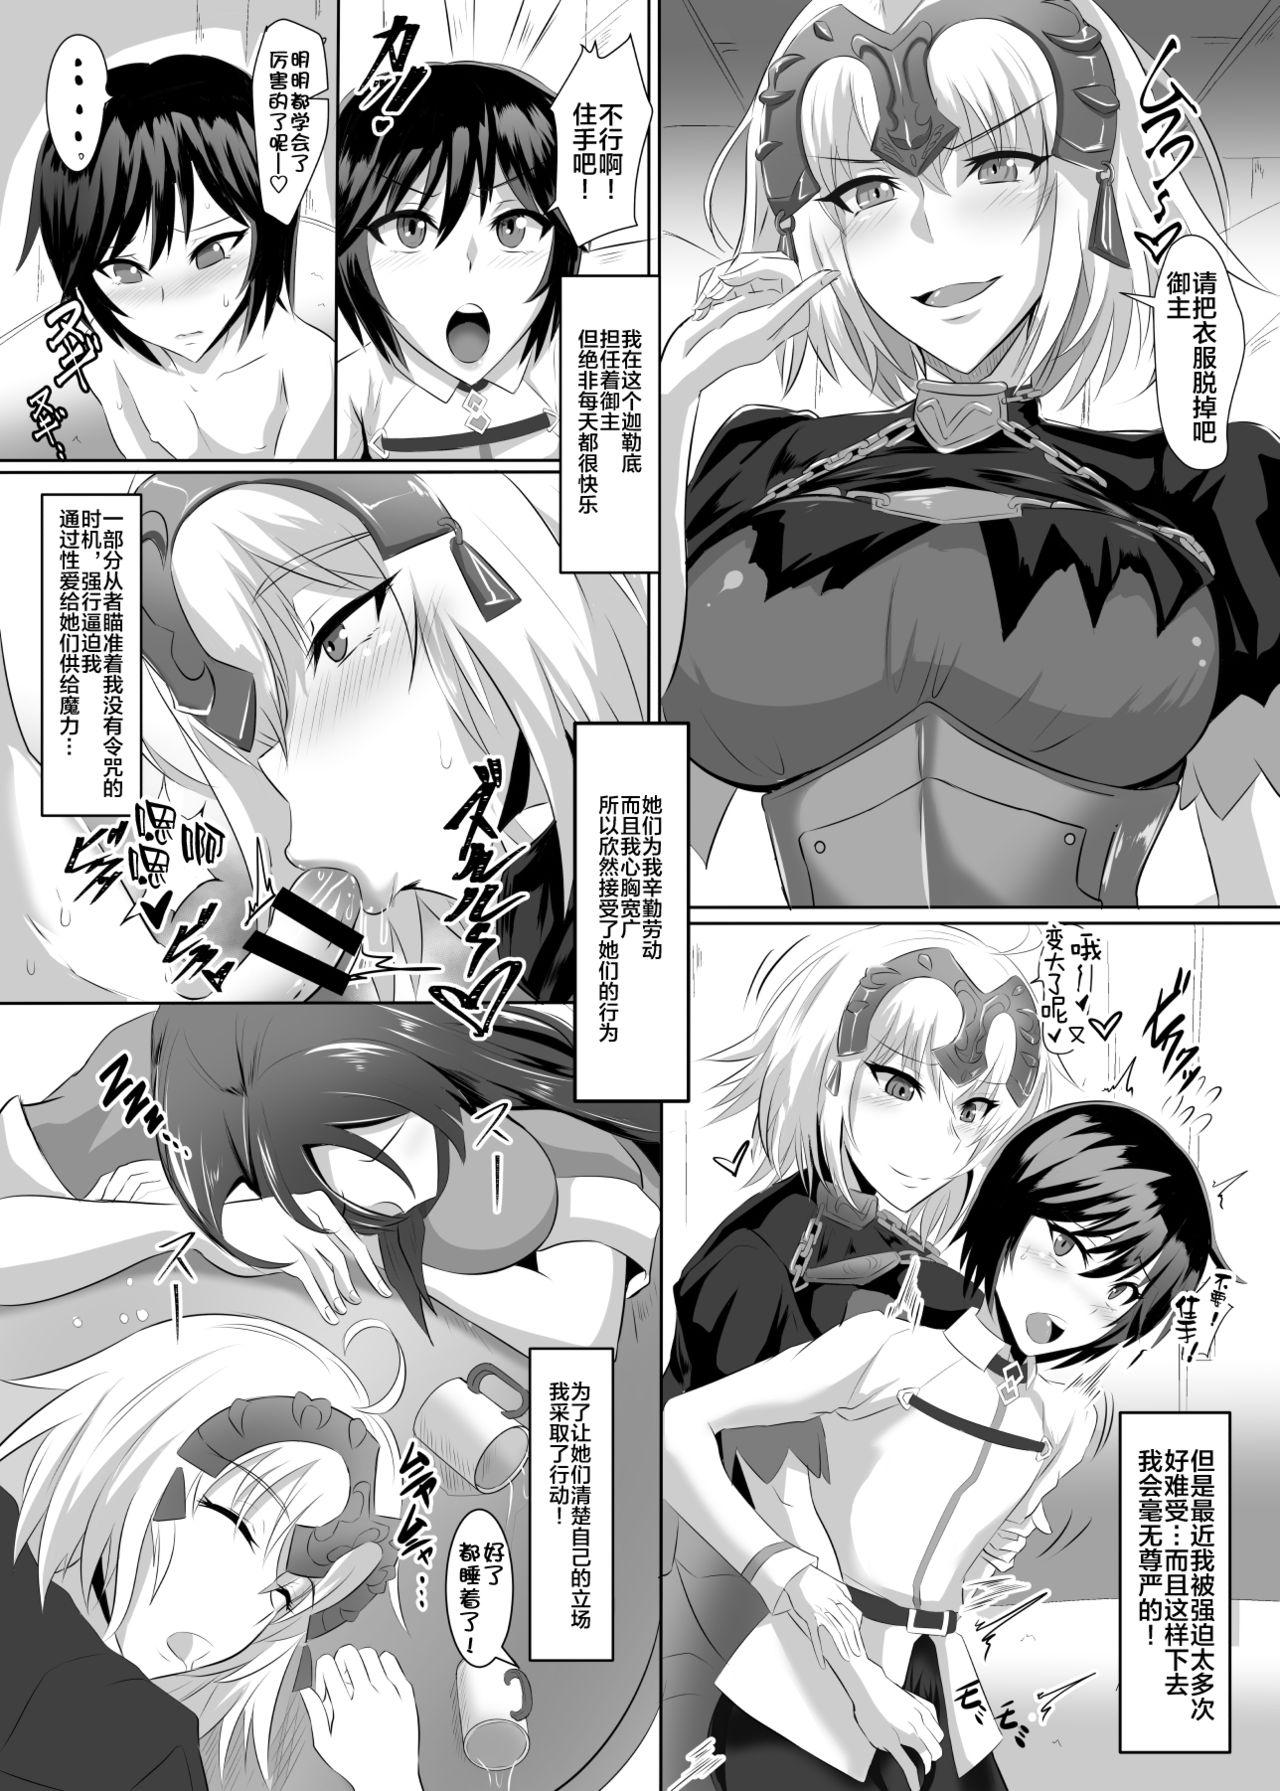 Anime Gehenna 7 - Fate grand order Granny - Page 4